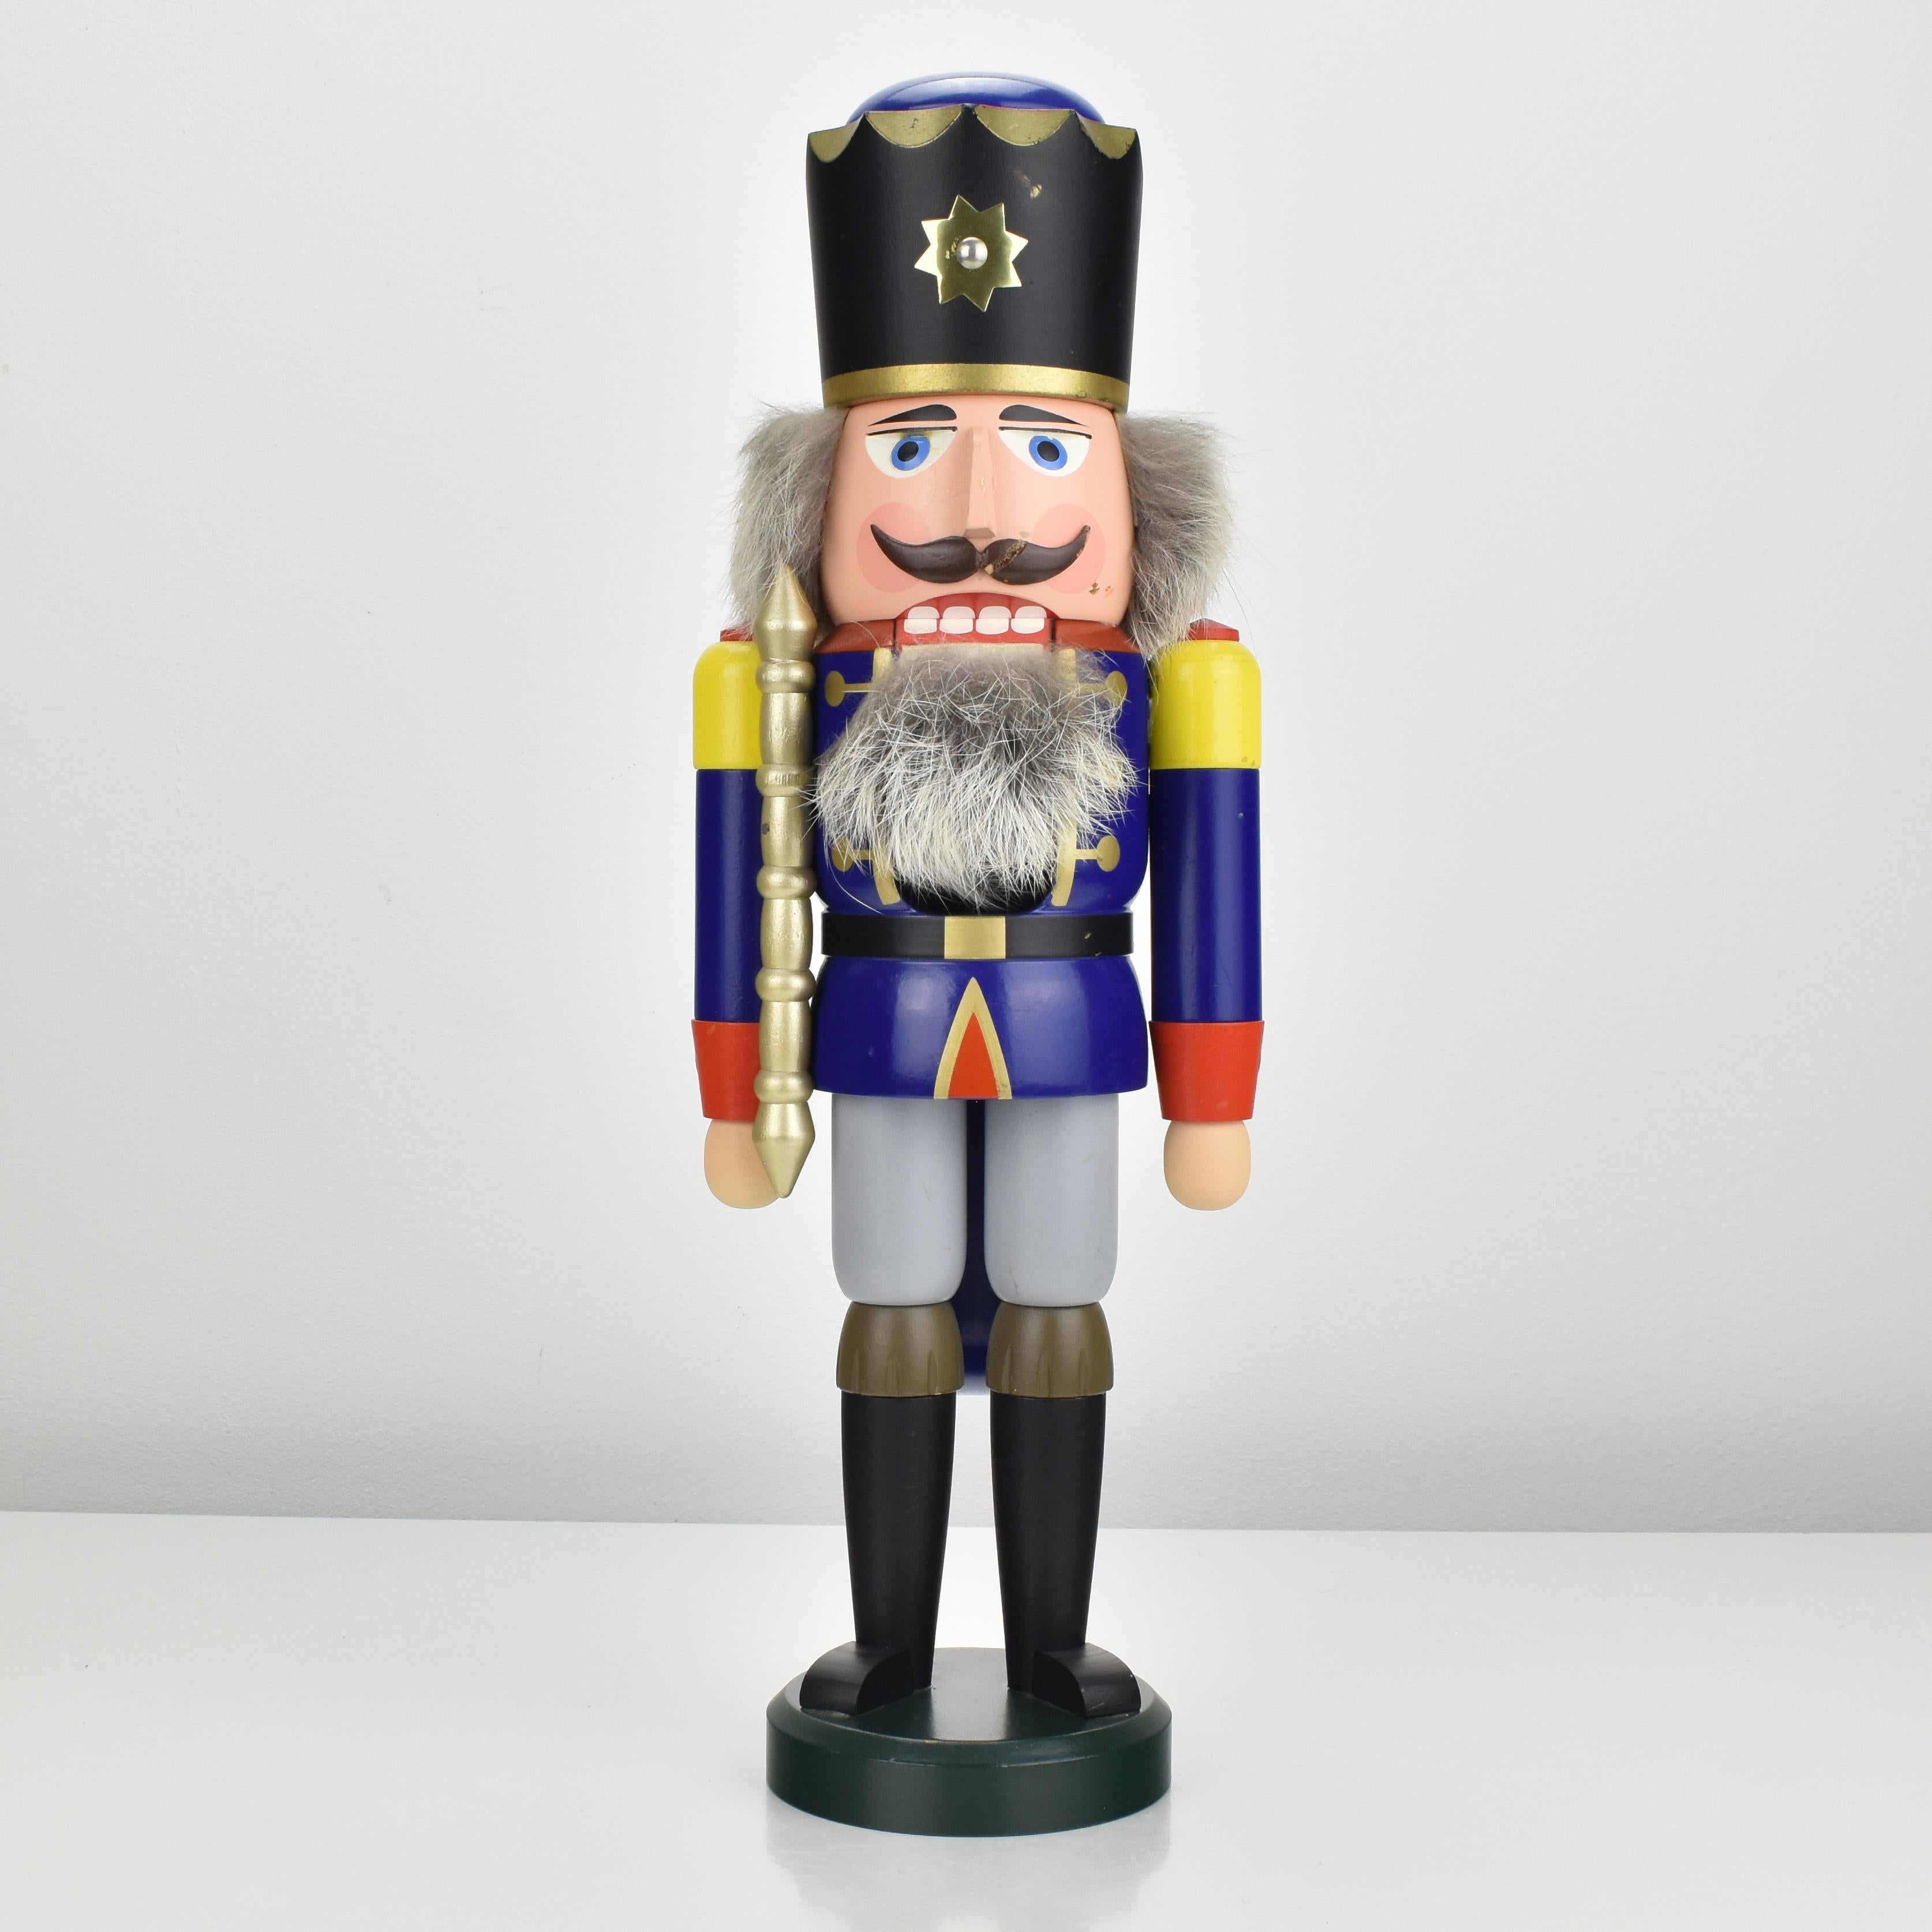 A vintage nutcracker from the Erzgebirge region, in shape of a king made of turned wood and painted in vibrant colors, dating back to the 1970s.
This large nutcracker is decorated with real fur and showcases the intricate craftsmanship and